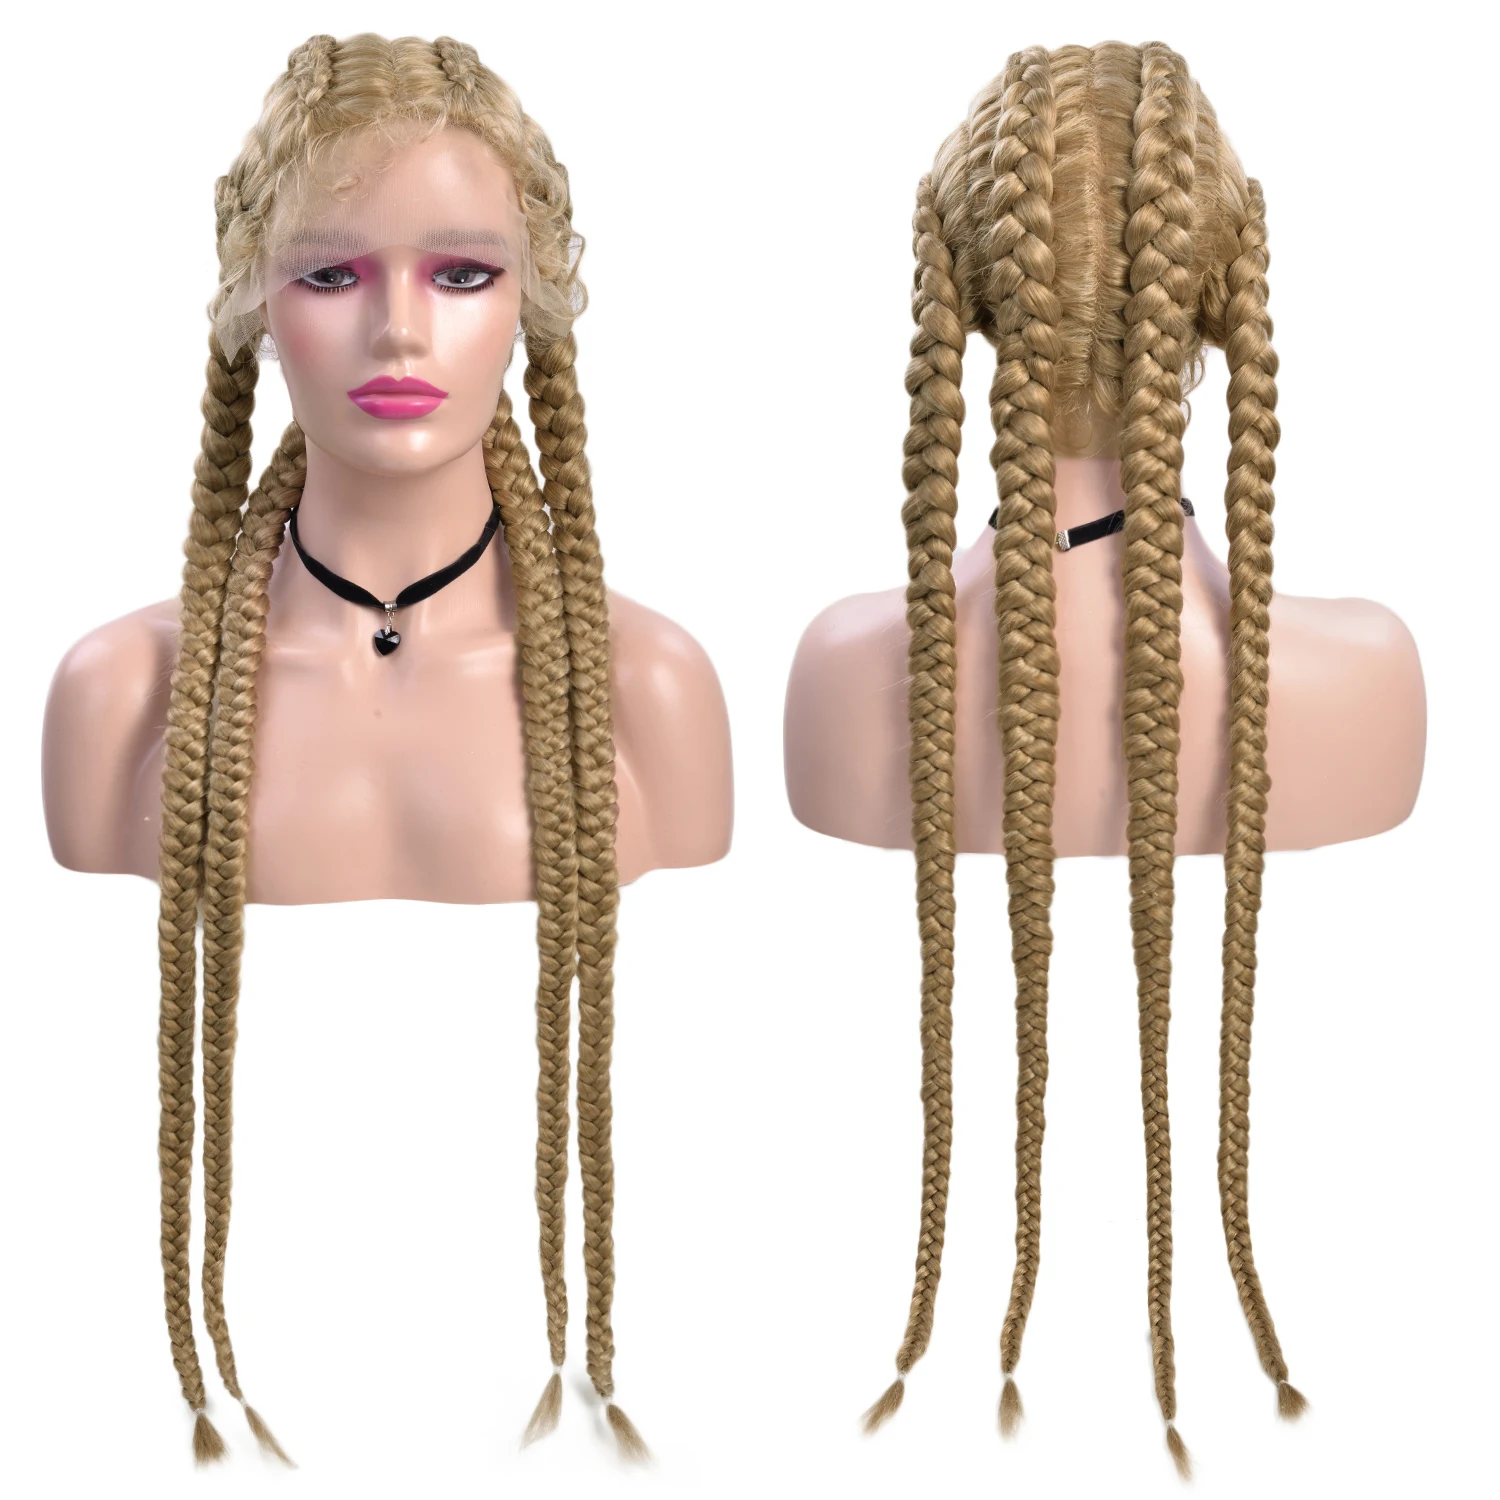 36 Inch Braided Wigs Synthetic Lace Front Wig For Black Women Cornrow Braids Lace Wigs With Baby Hair Box Braid Wig 613 Color